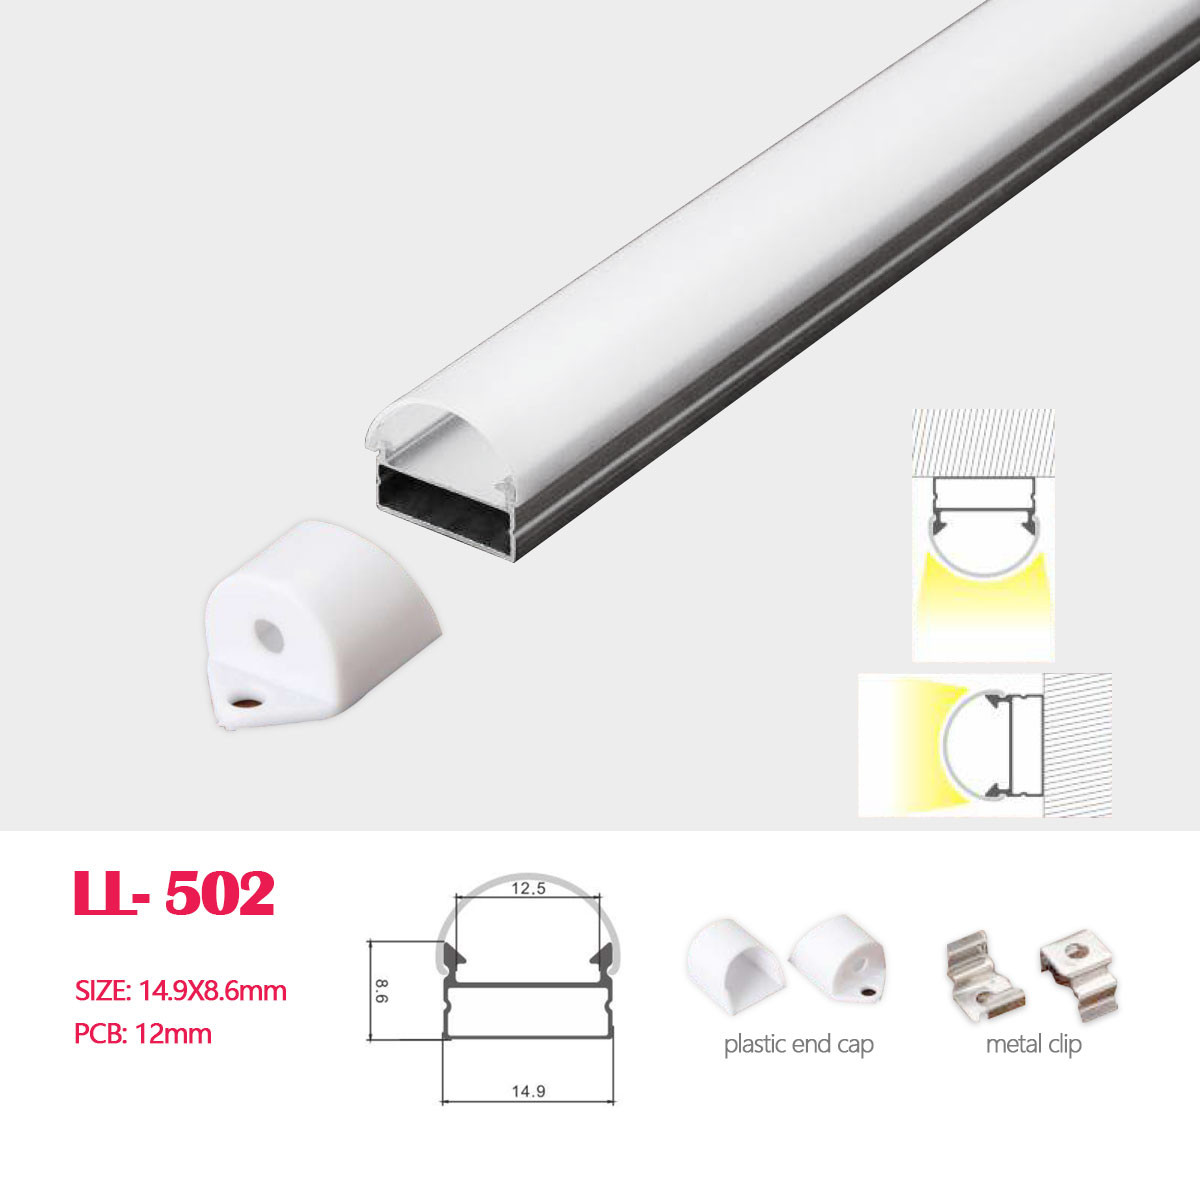 1M(3.28FT) 14.9MM*8.6MM  LED Aluminum Profile with Semiround Milky White Cover, Ceiling or Wall Mounted for LED Rigid Strip Lighting System